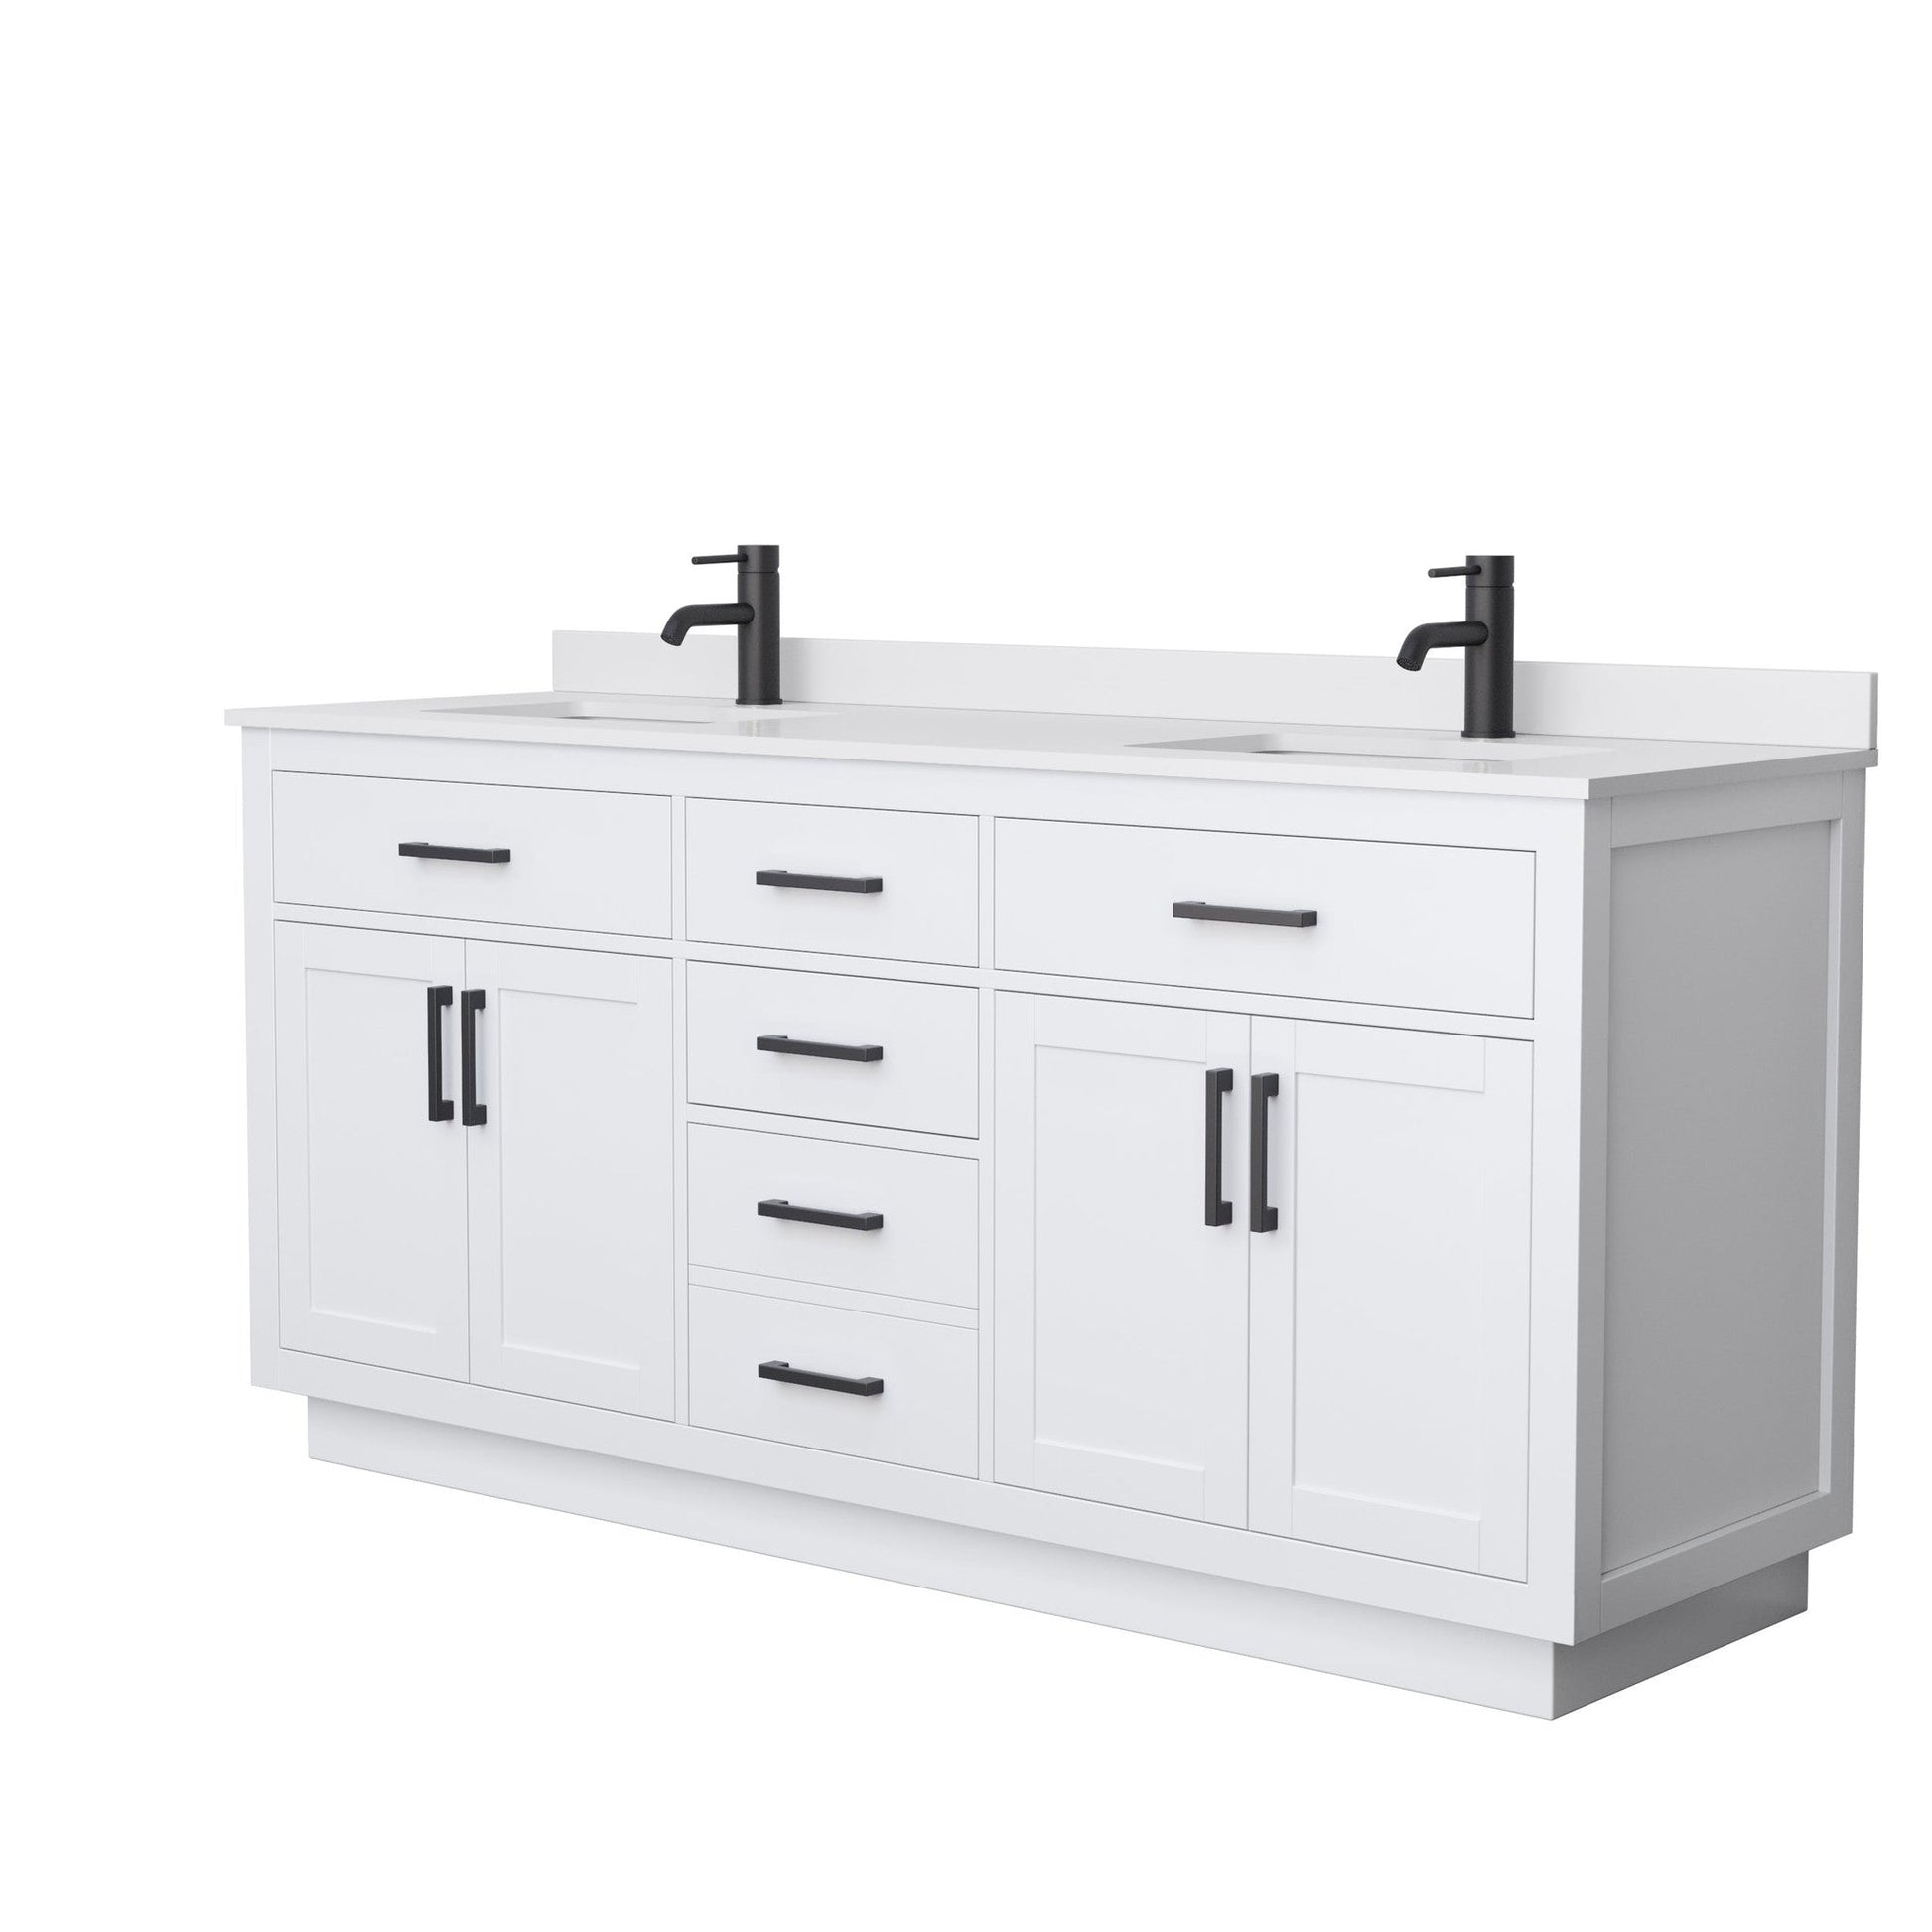 Beckett 72" Double Bathroom Vanity With Toe Kick in White, White Cultured Marble Countertop, Undermount Square Sinks, Matte Black Trim